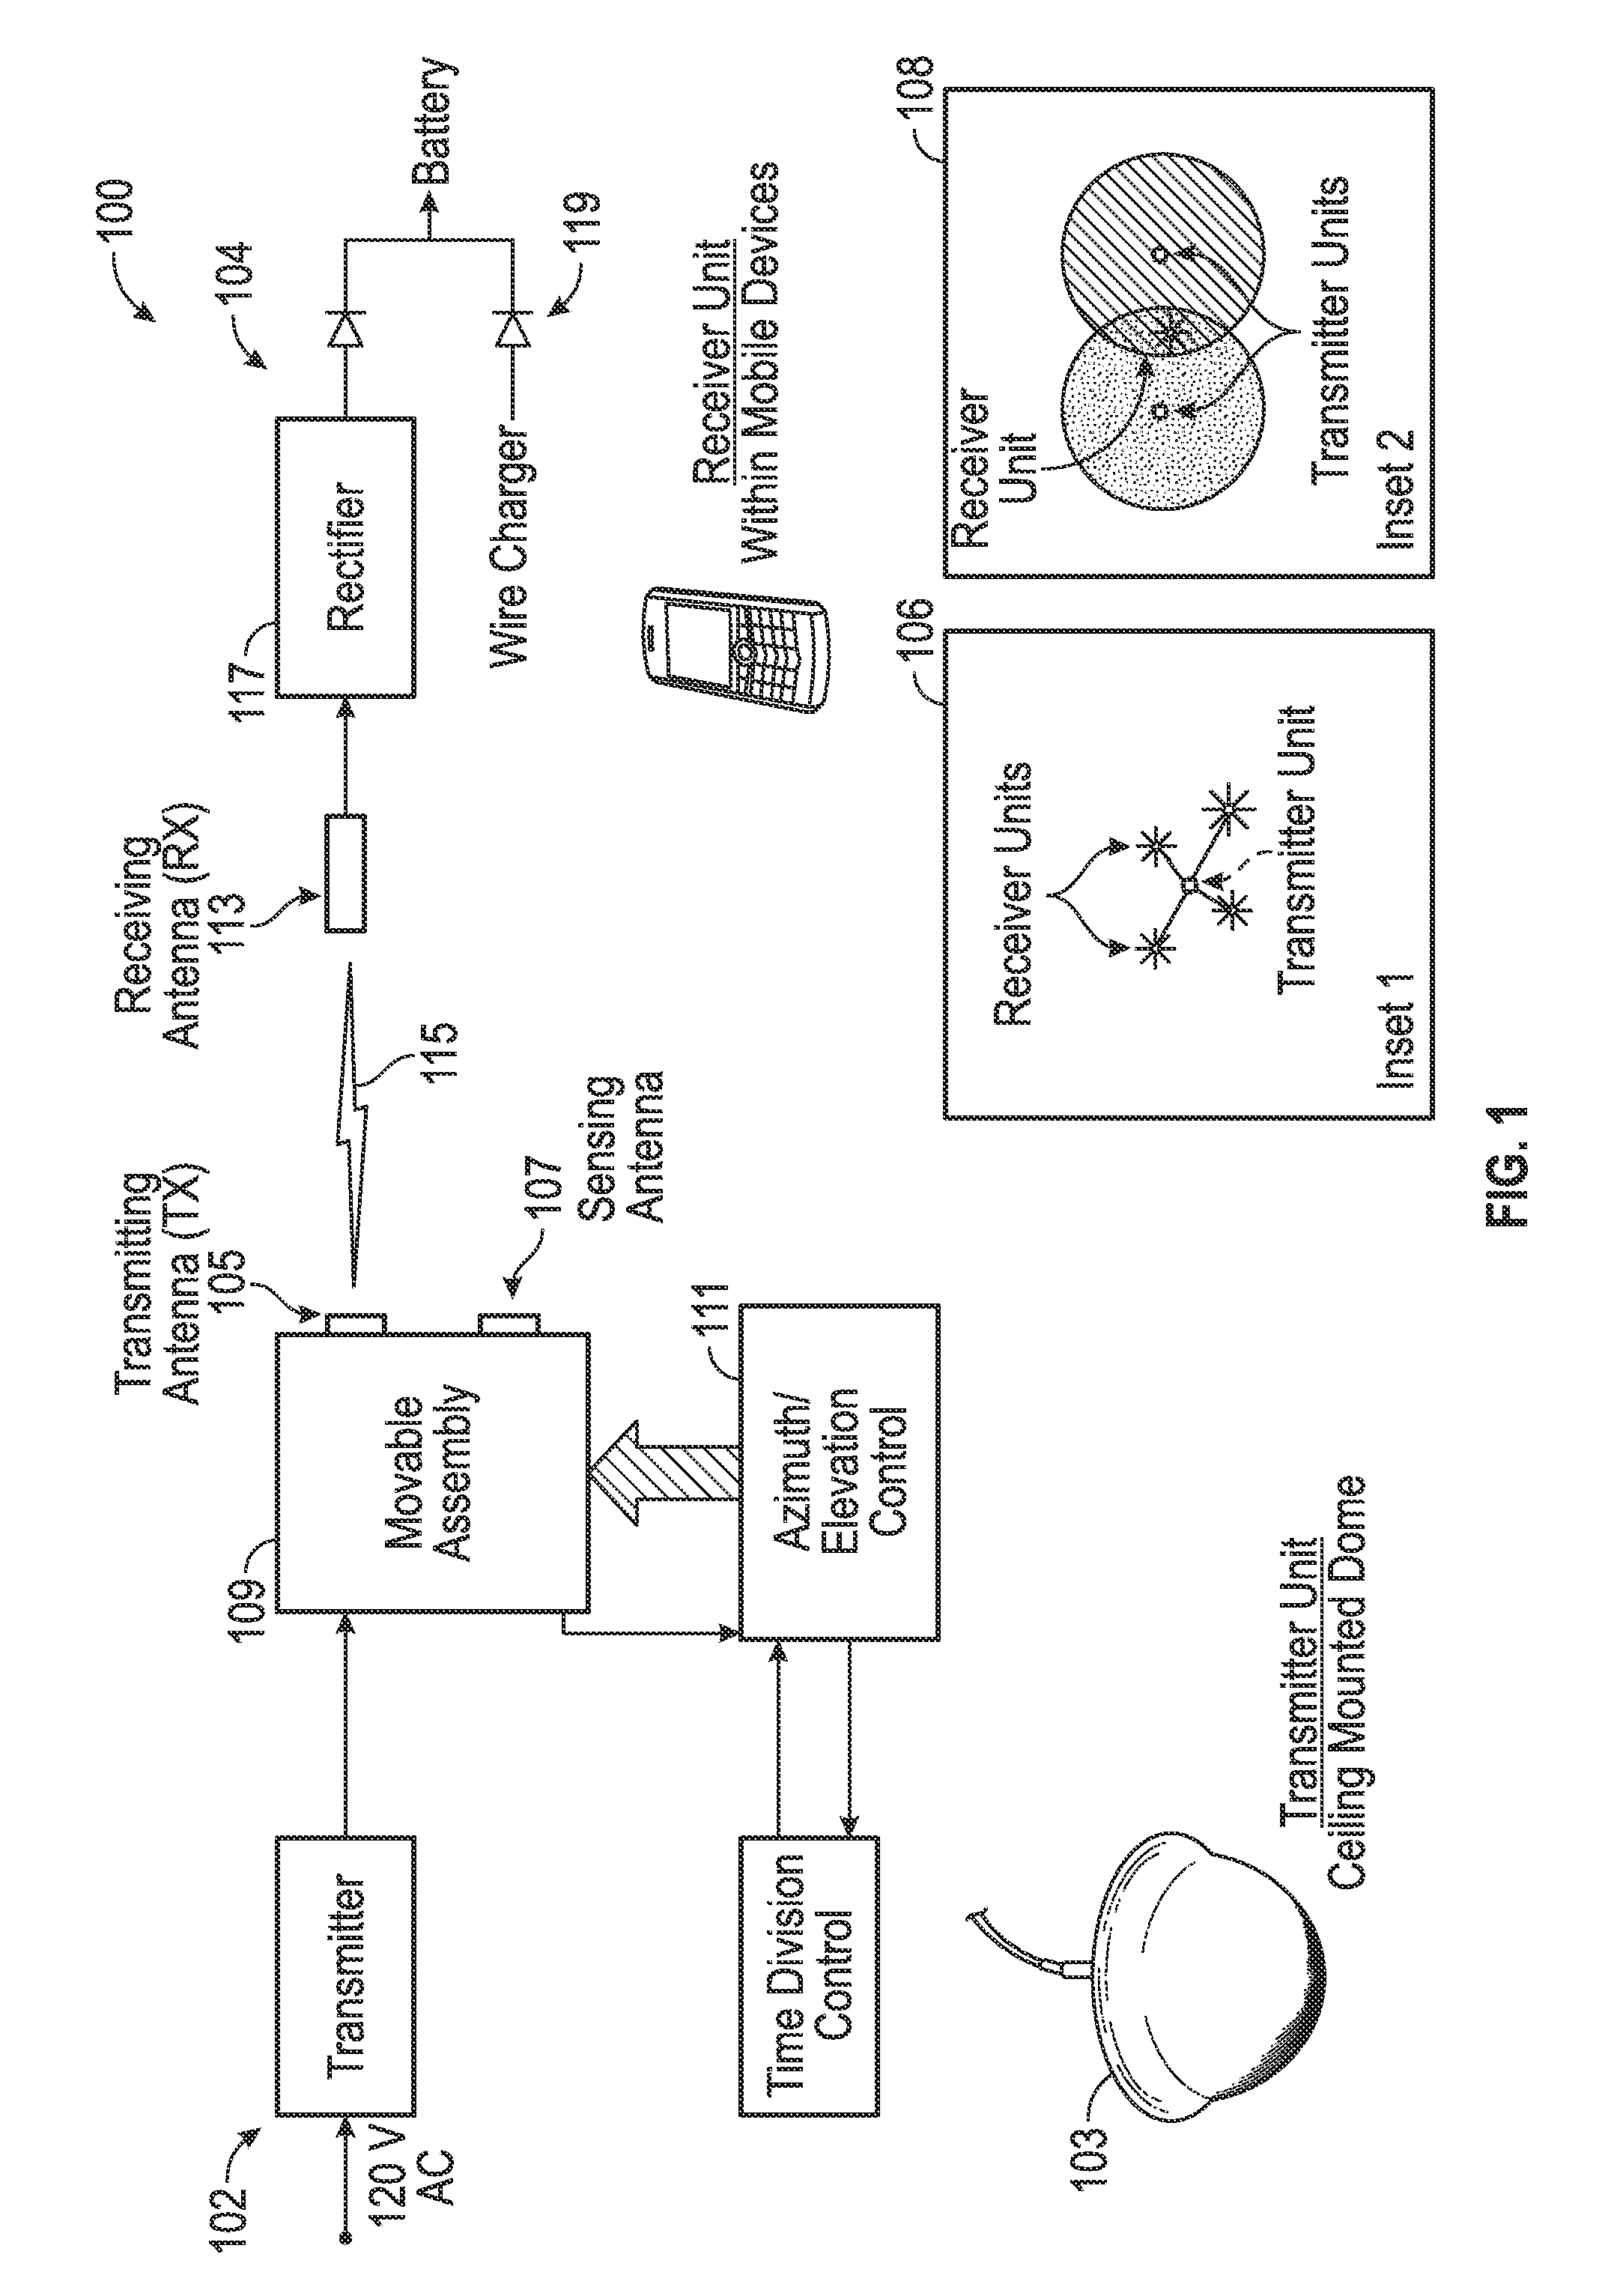 Method and apparatus for delivering energy to an electrical or electronic device via a wireless link